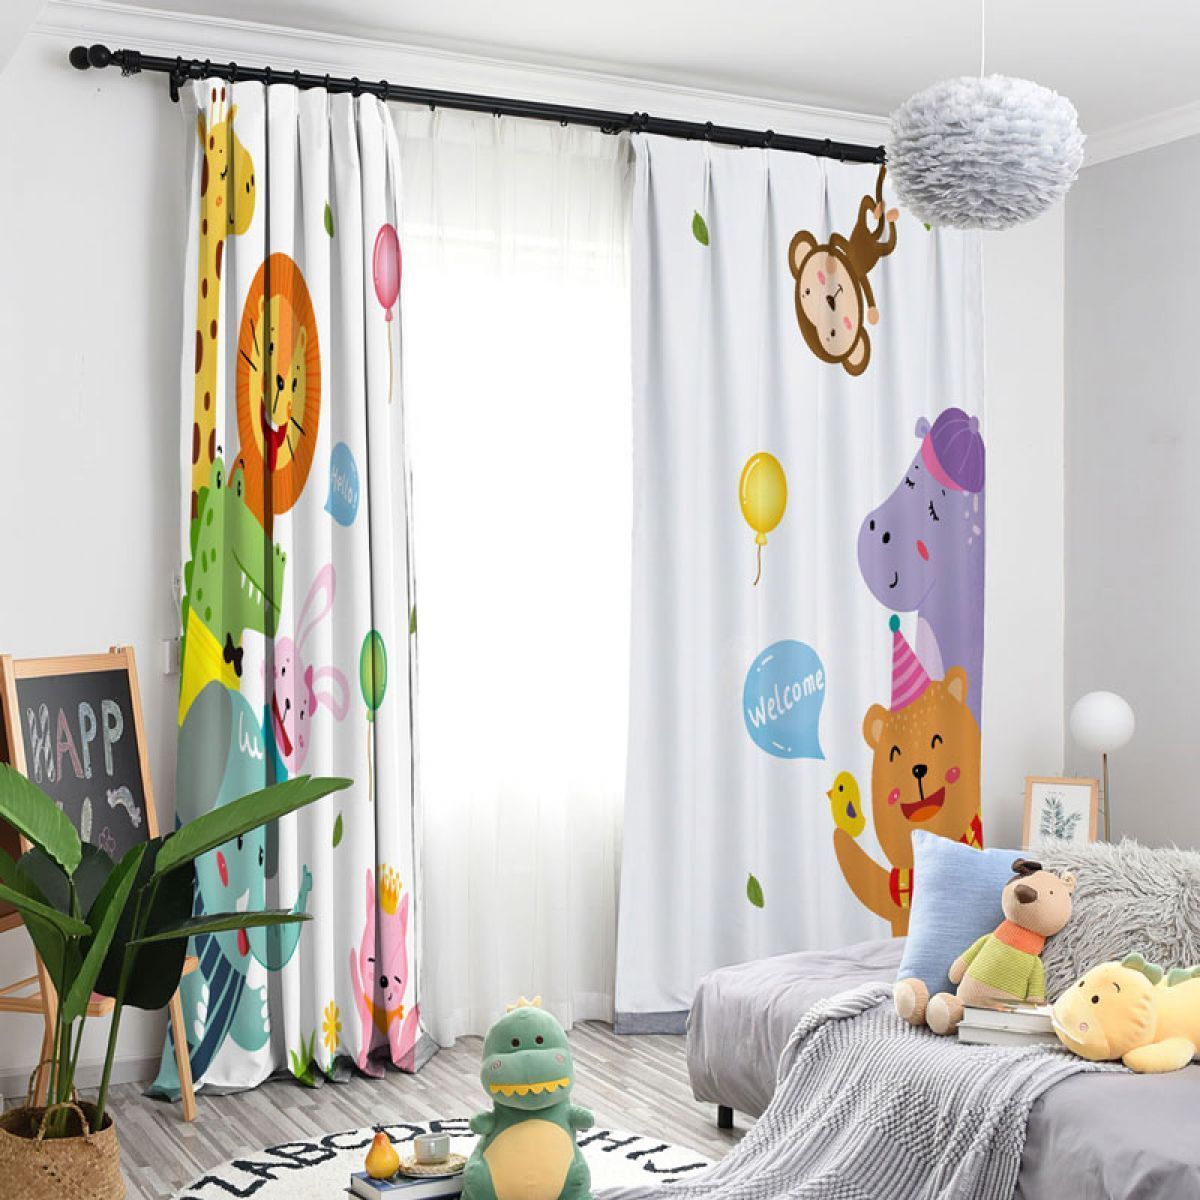 3d balloon and animals printed window curtain home decor 2561